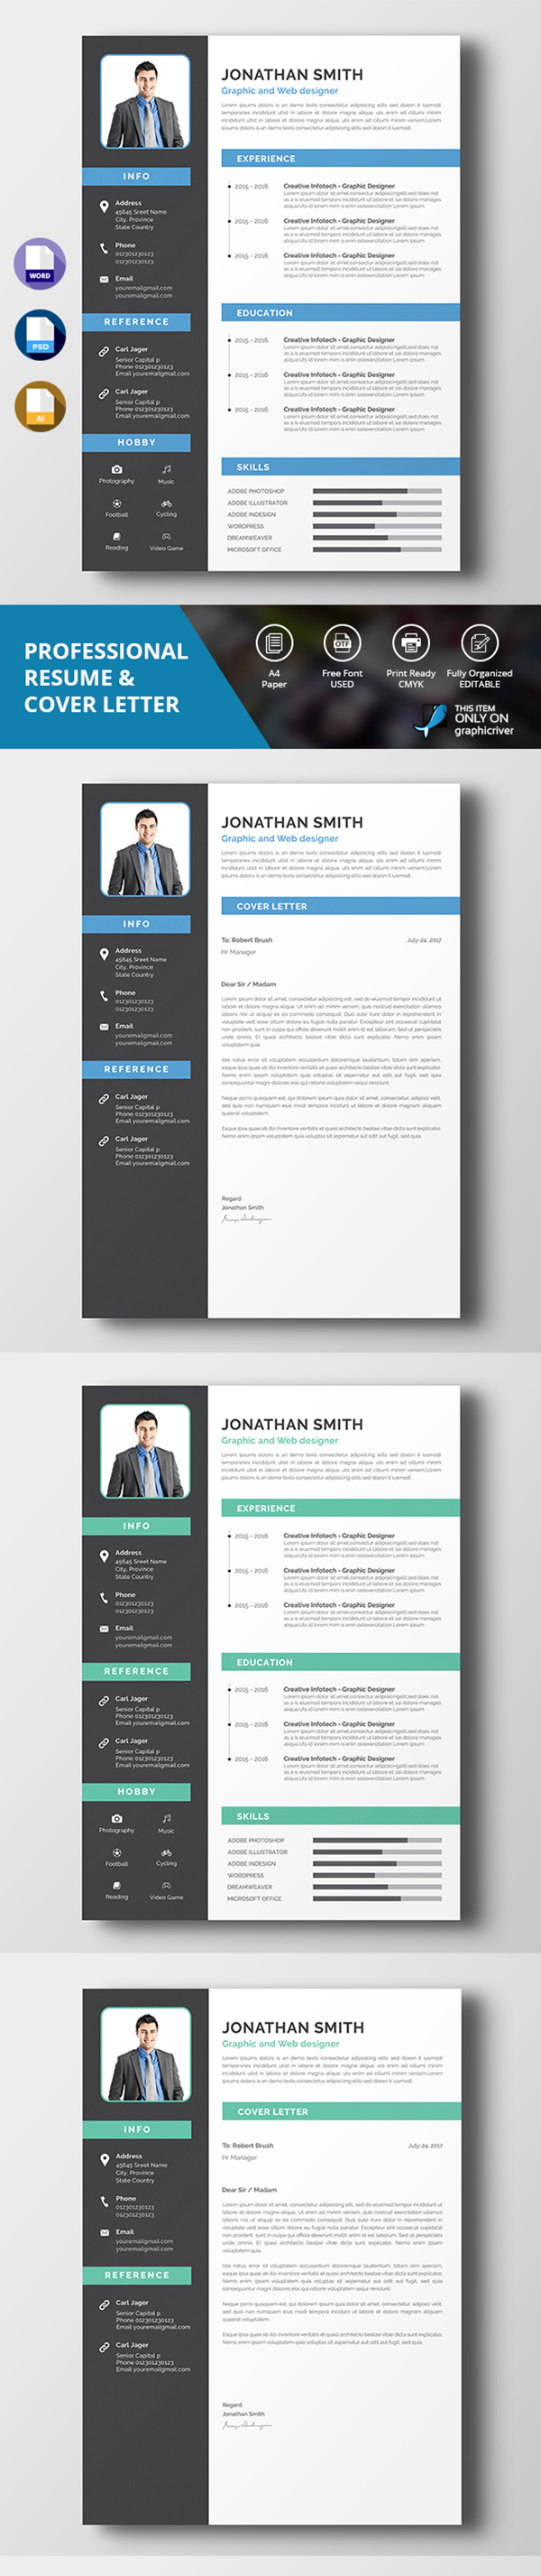 Simple Resume & Cover Letter